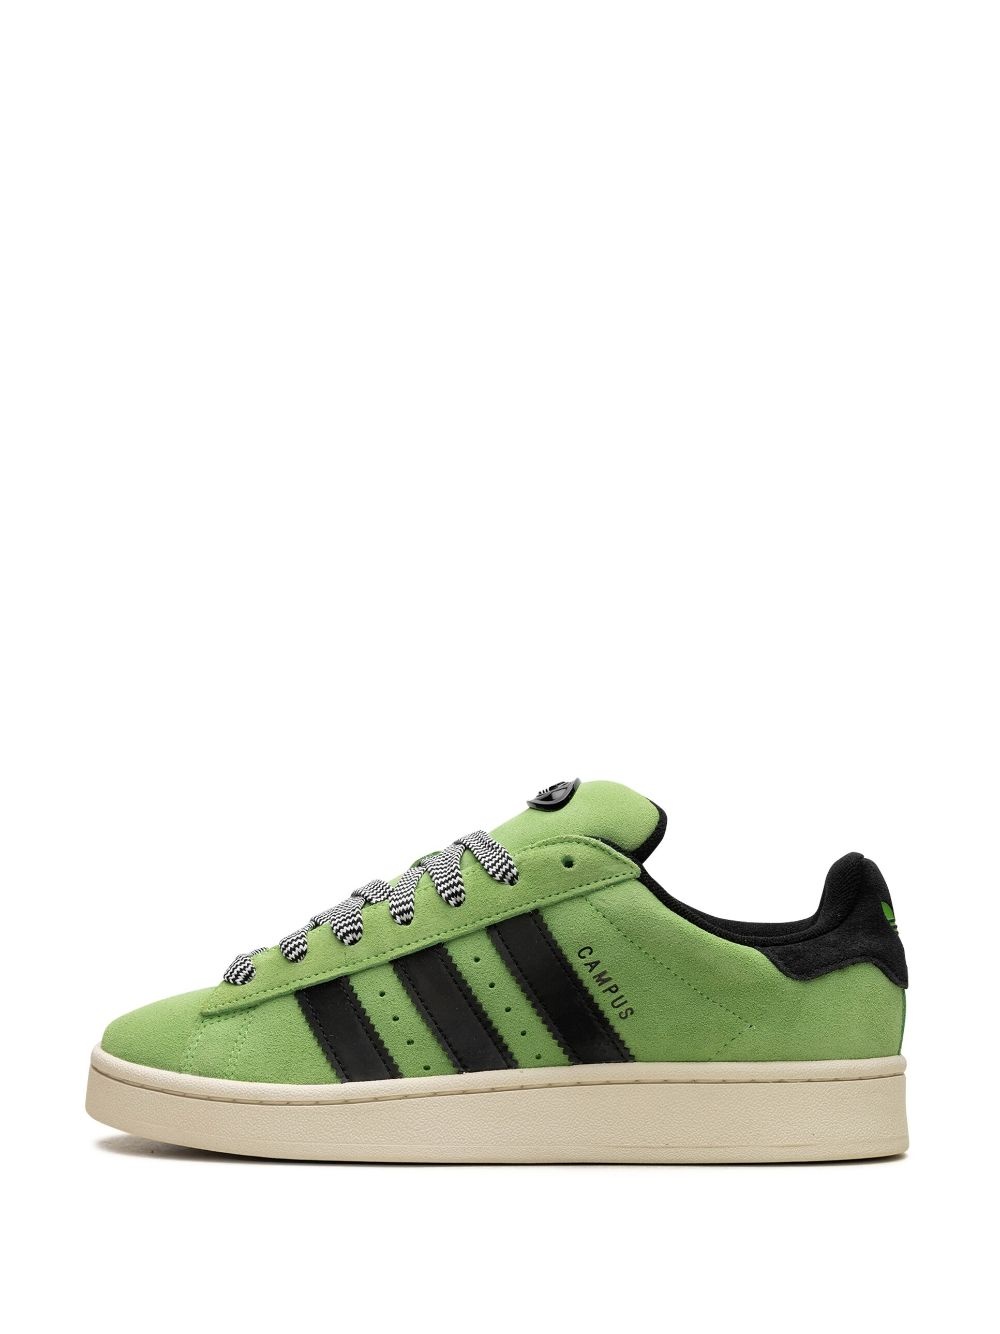 Campus 00s "Solar Green" sneakers - 6